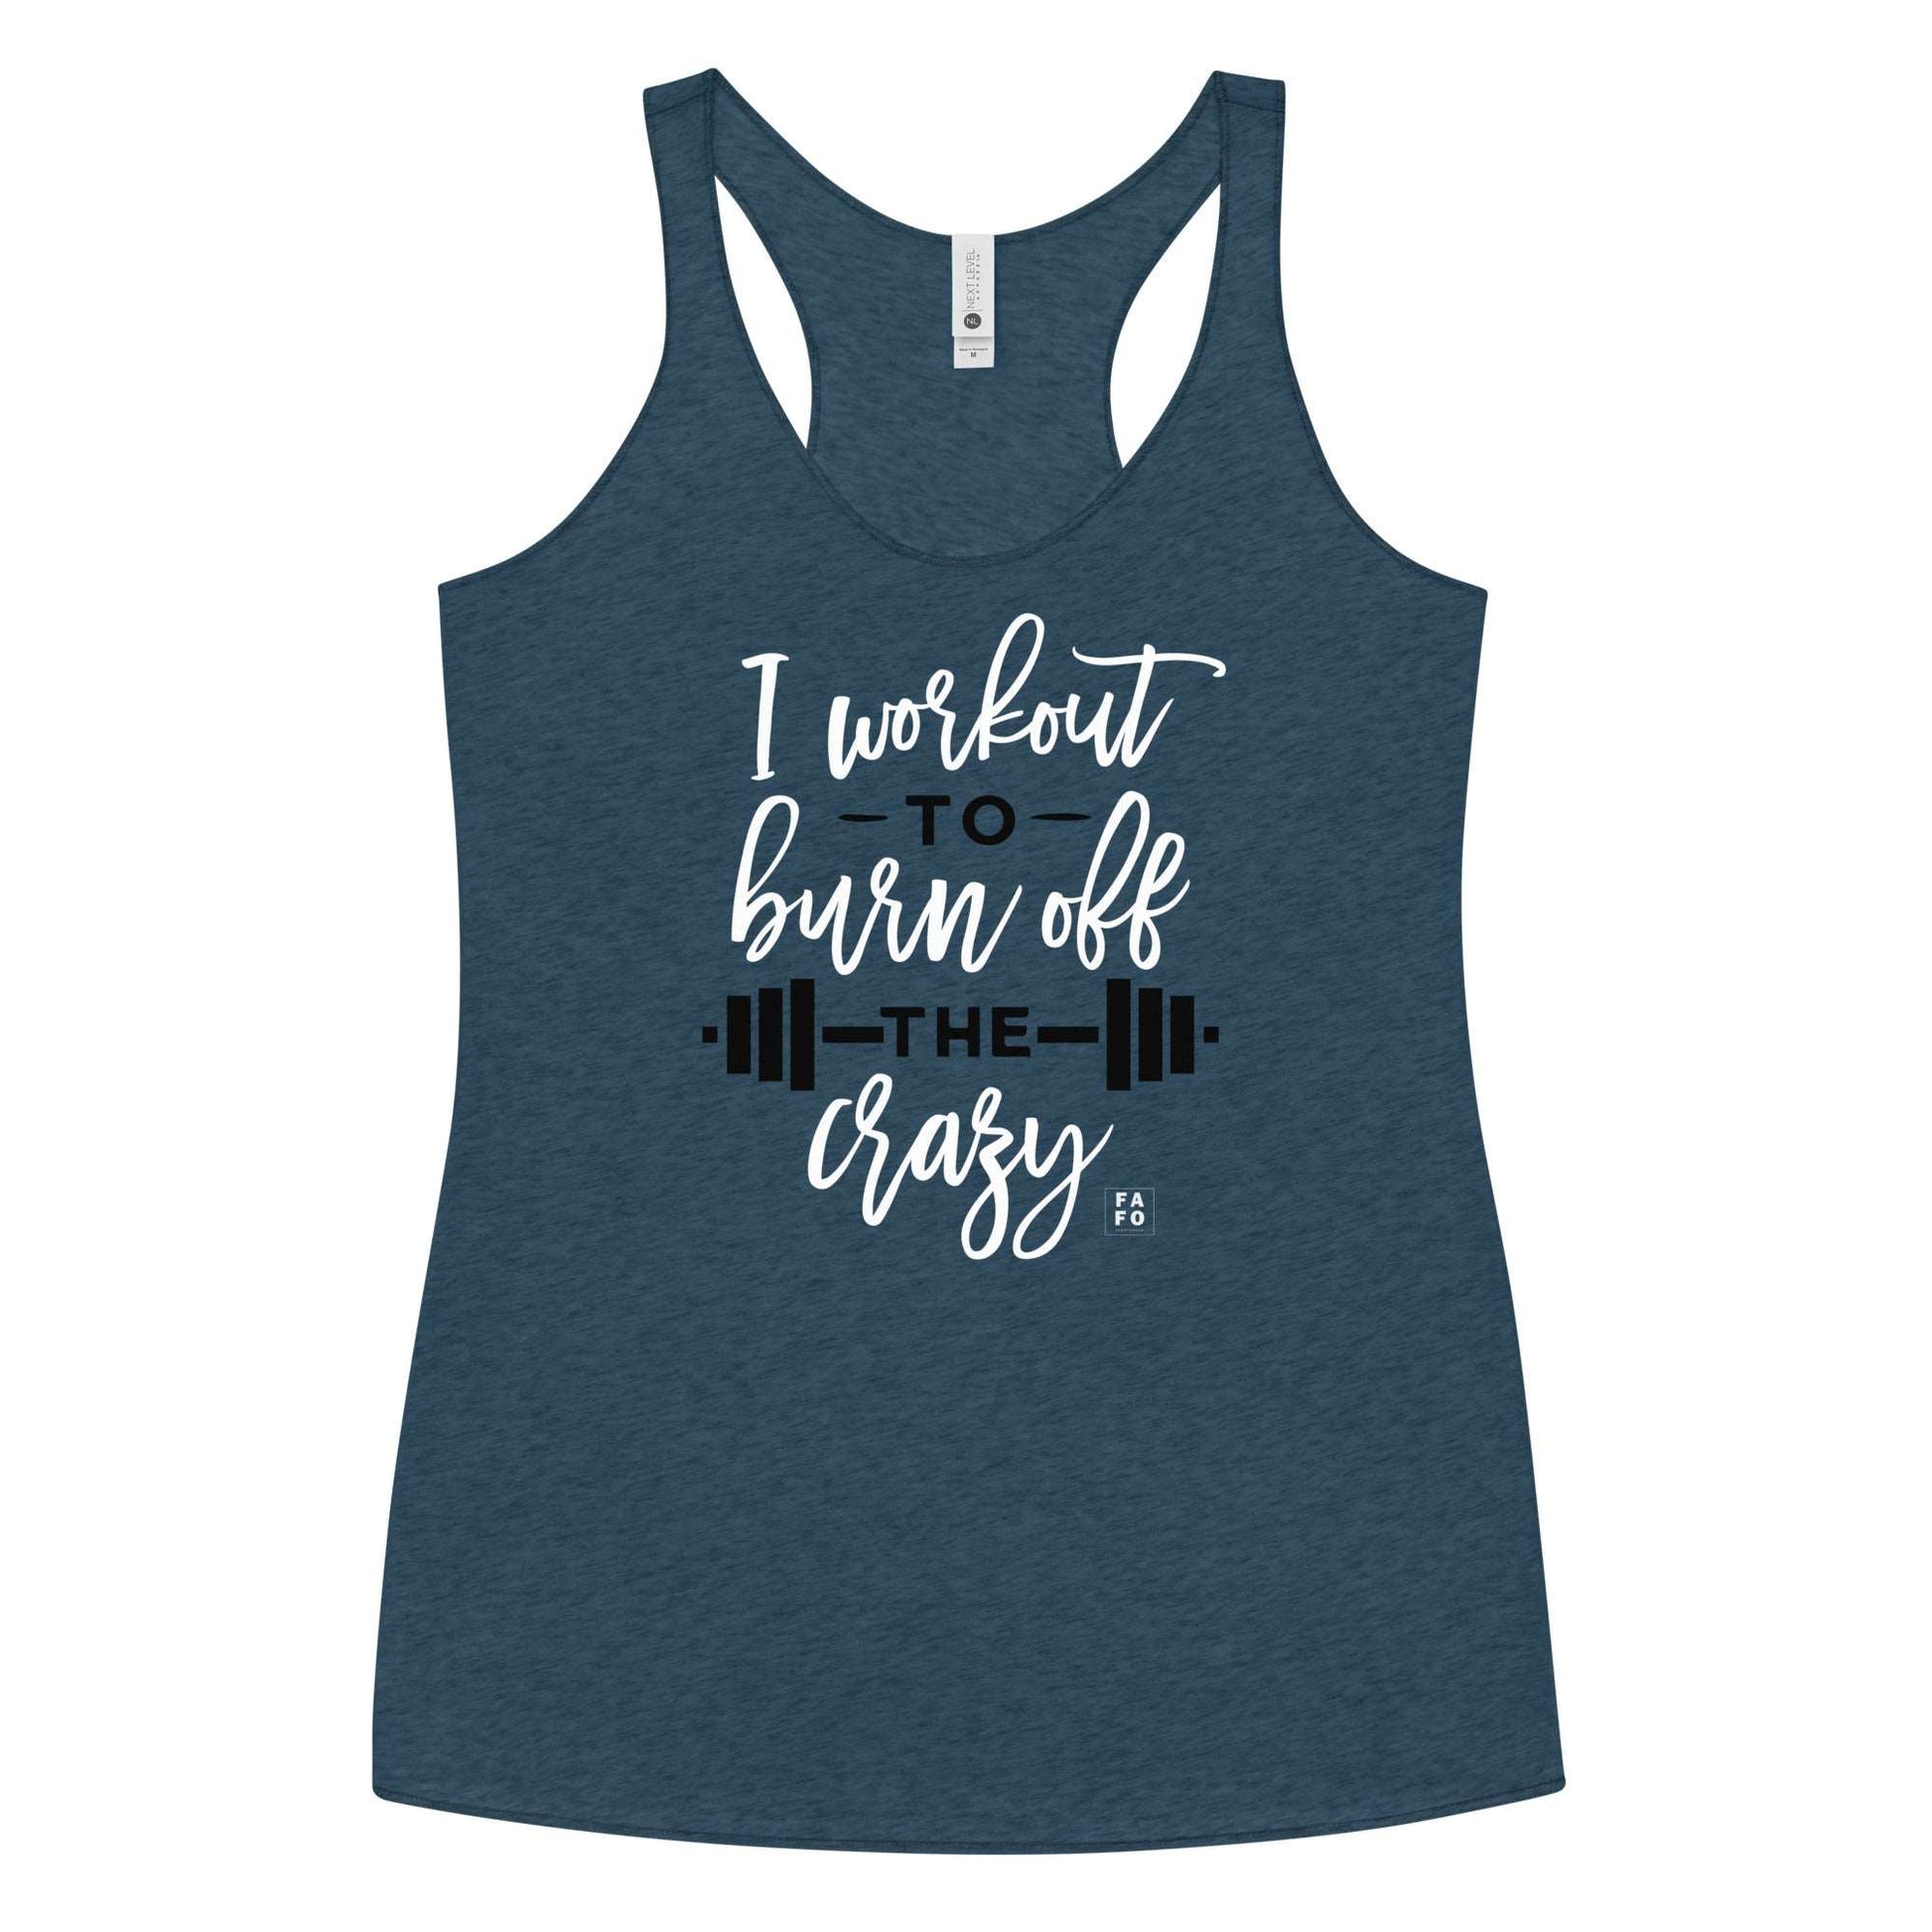 Next Level Racerback Tank - Burn Off the Crazy - Turquoise